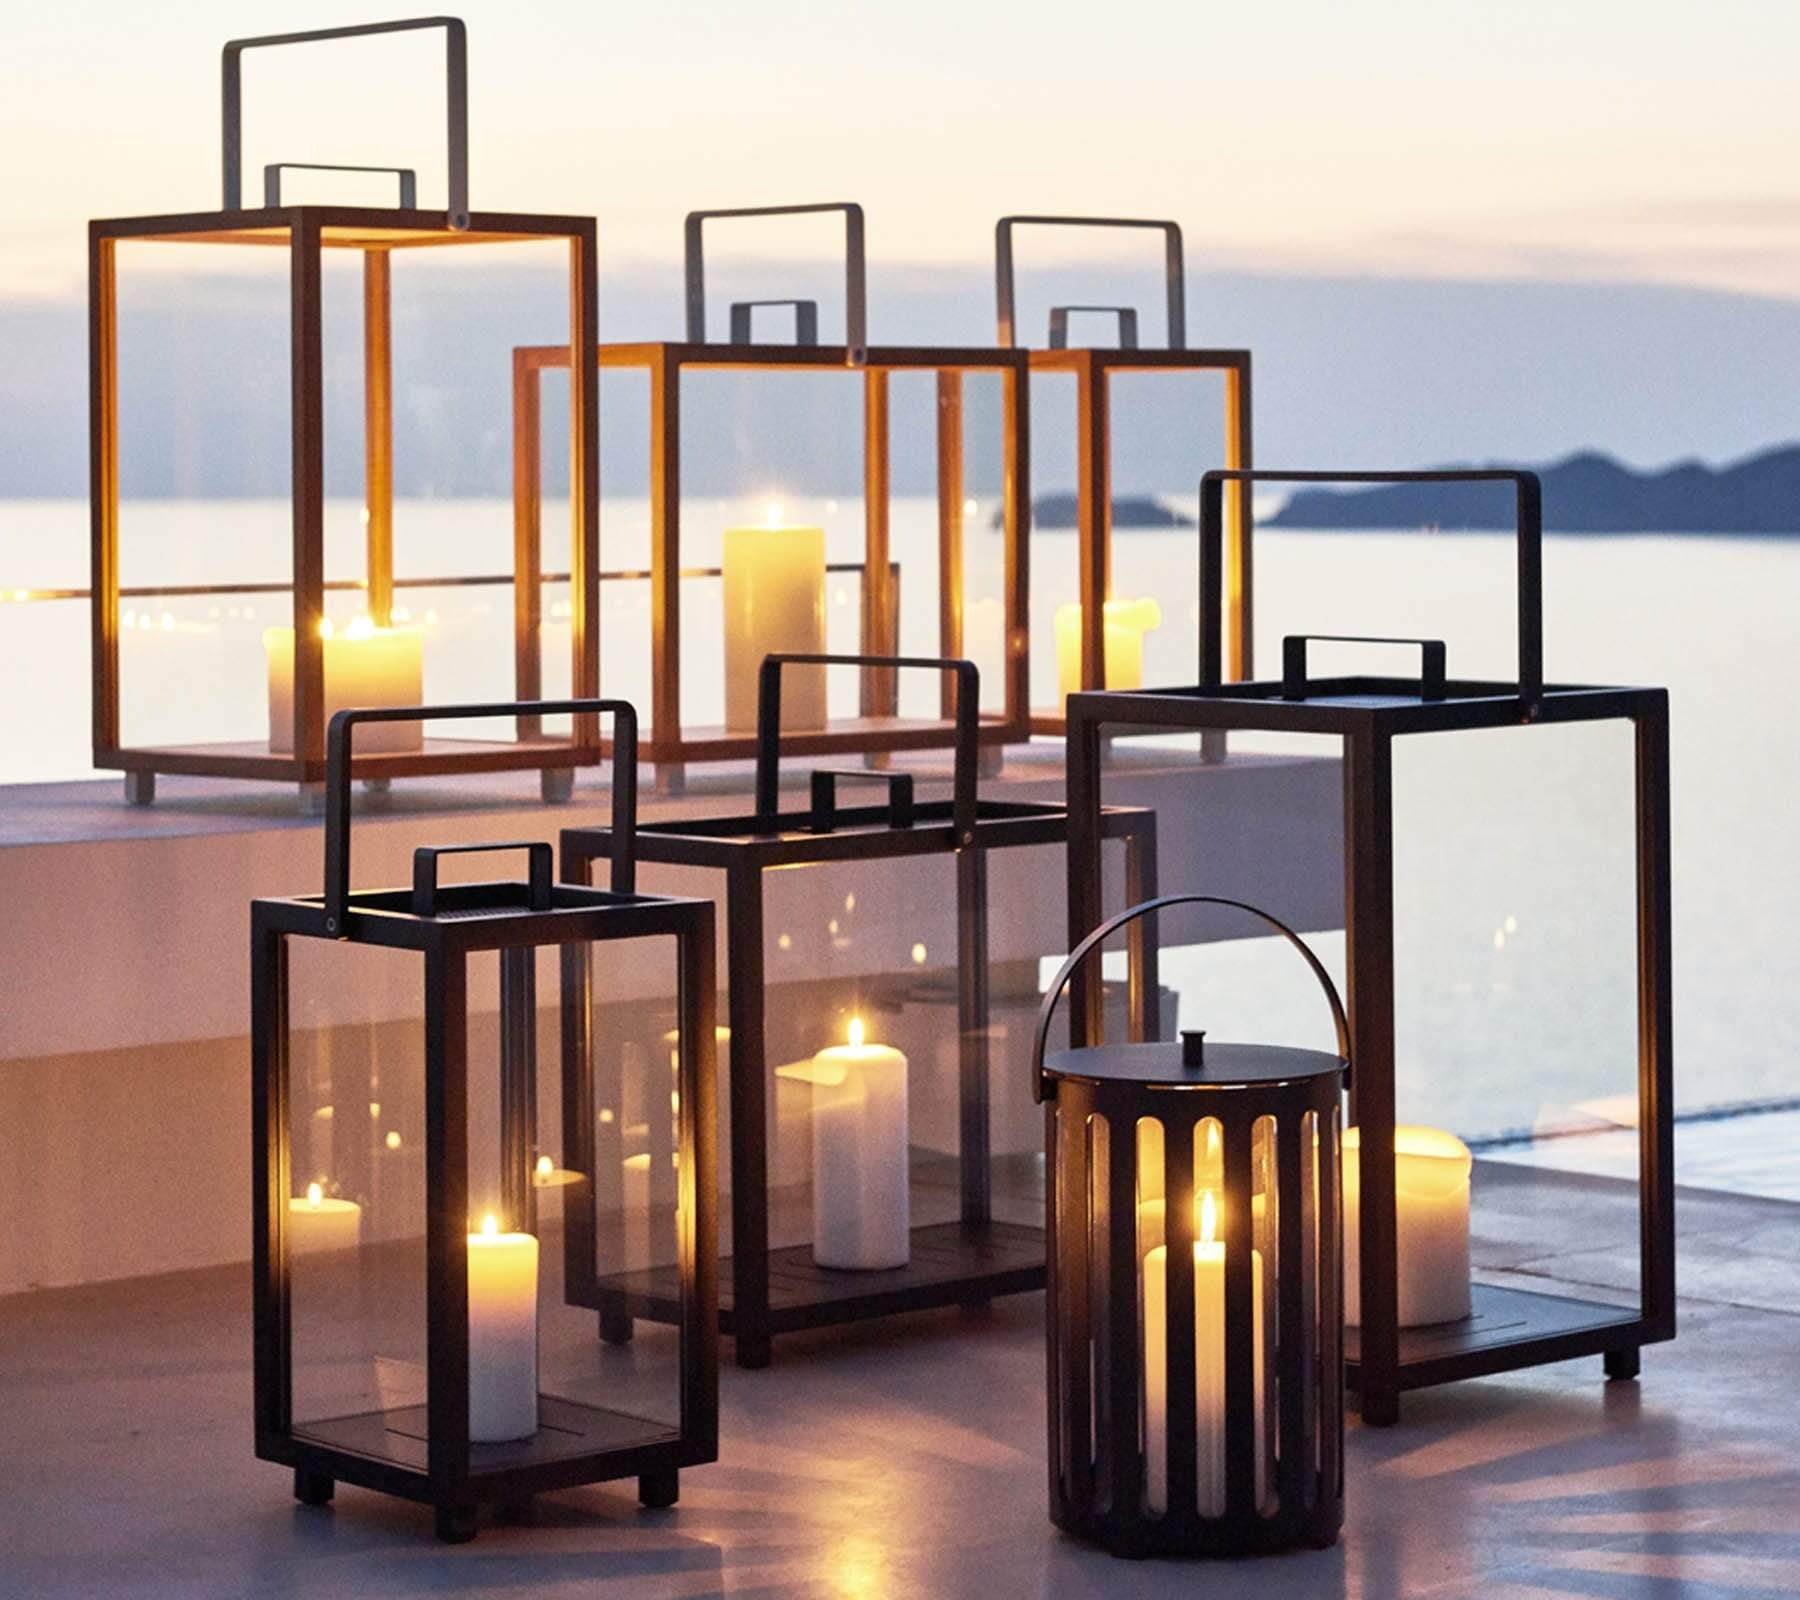 Boxhill's Lighthouse Outdoor Large Aluminum Lantern for Candles | Set of 2 lifestyle image with Lighthouse Outdoor Large Teak Lantern and Lighttube Outdoor Large Lantern at seafront